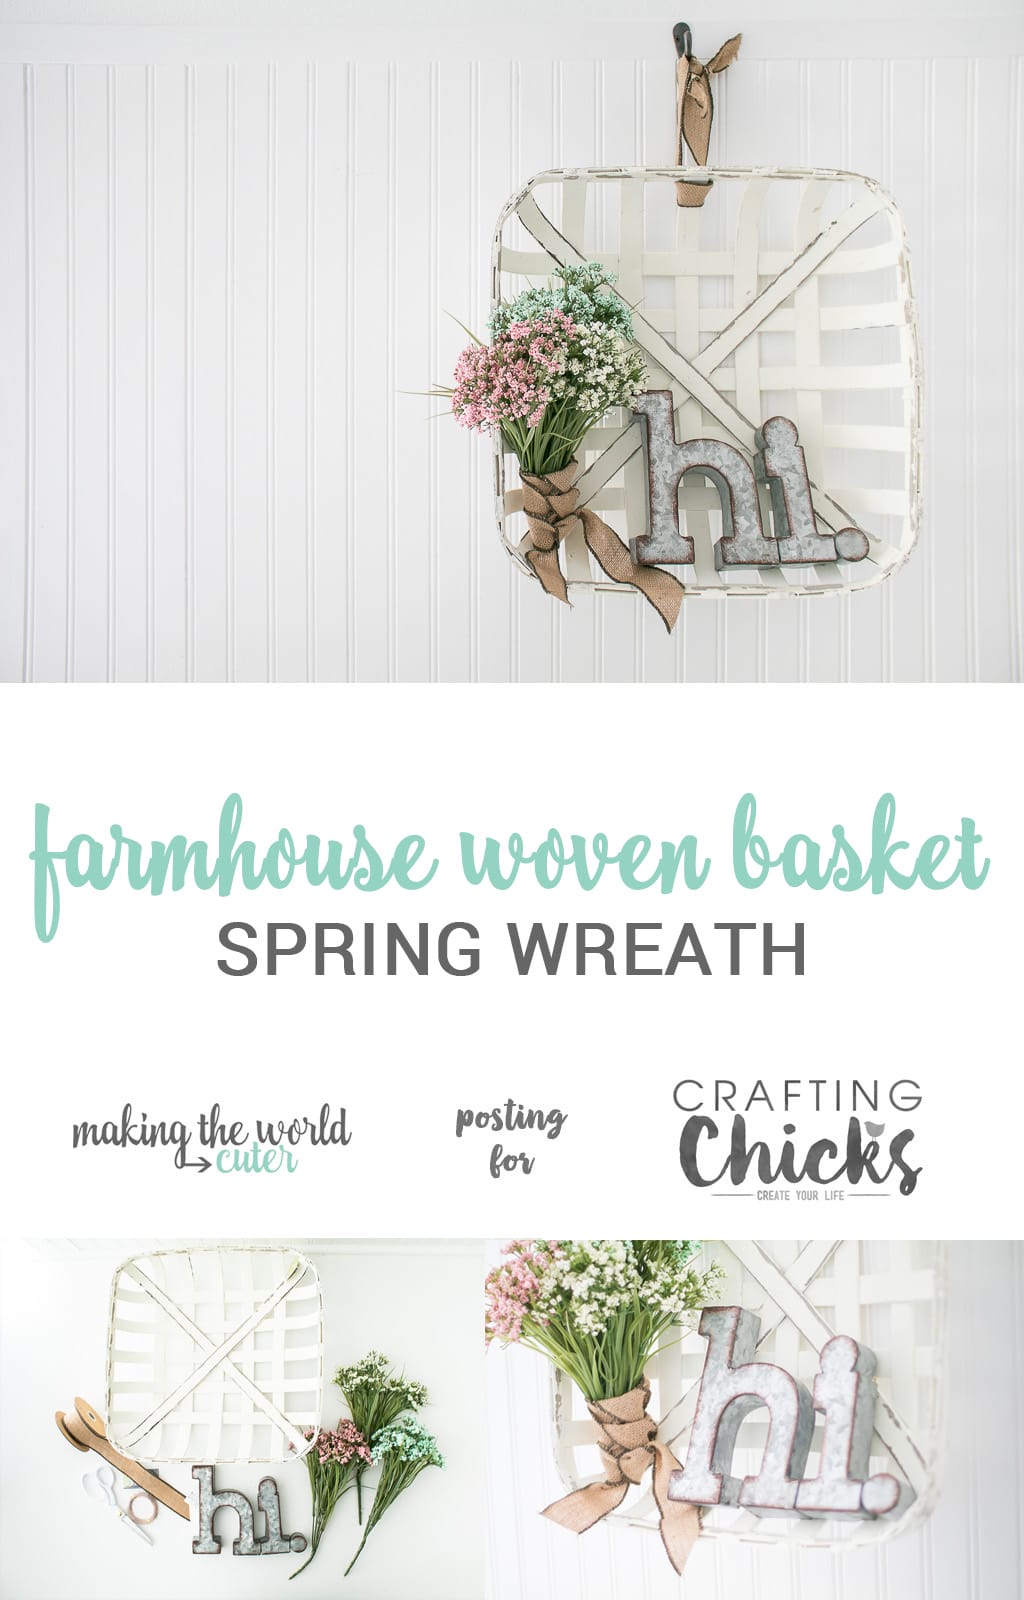 DIY Farmhouse Woven Basket Spring Wreath | Make a darling farmhouse style spring wreath using a woven basket, some spring blooms and cute galvanized metal letters!